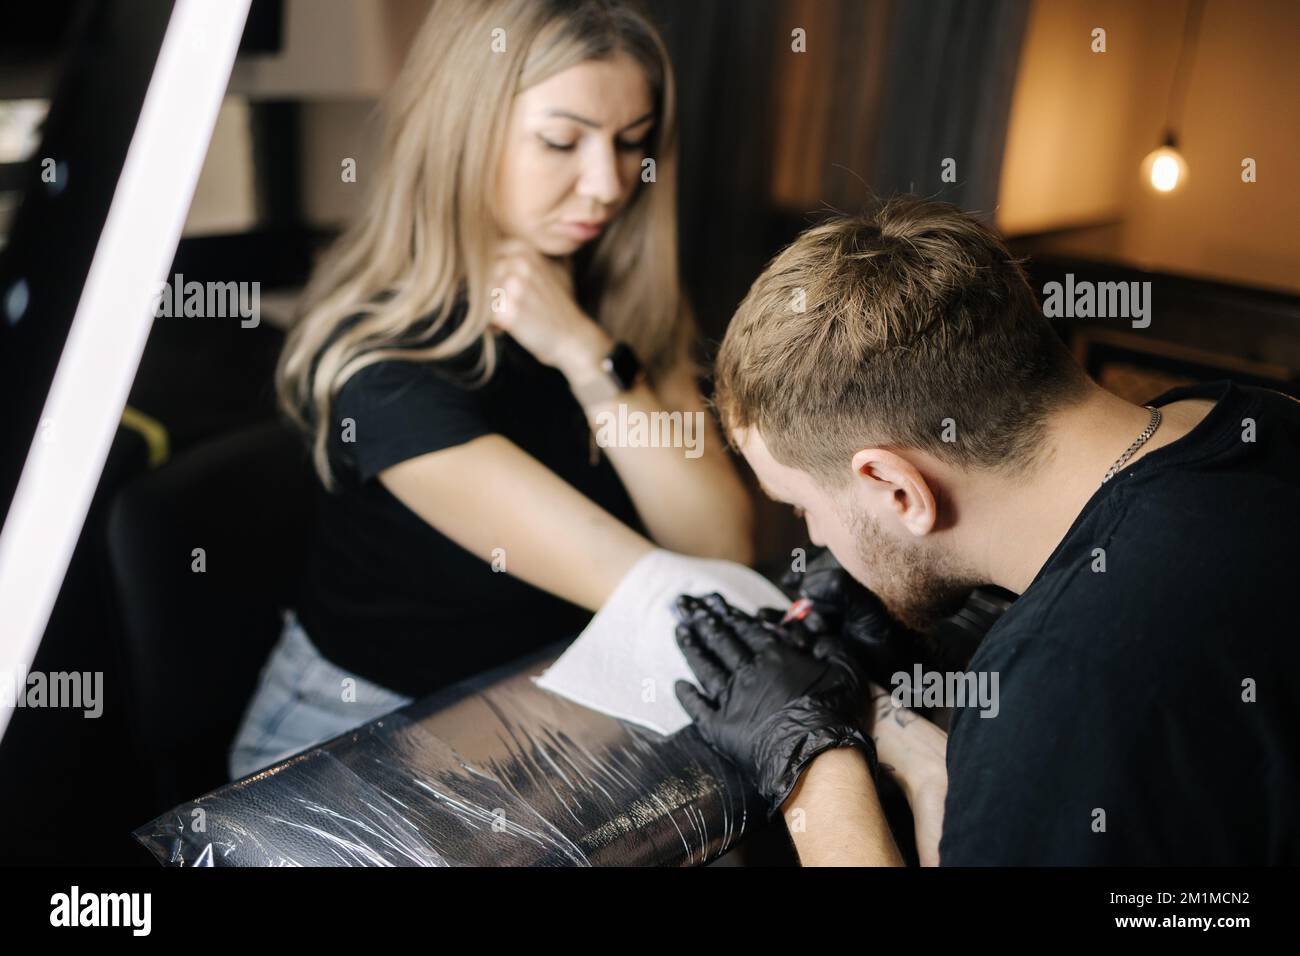 Young smiled tattoo artist is tattooing a woman's hand. Wireless tattoo machine, safety and hygiene at work. Close-up of tattoo artist work. Tattoo Stock Photo